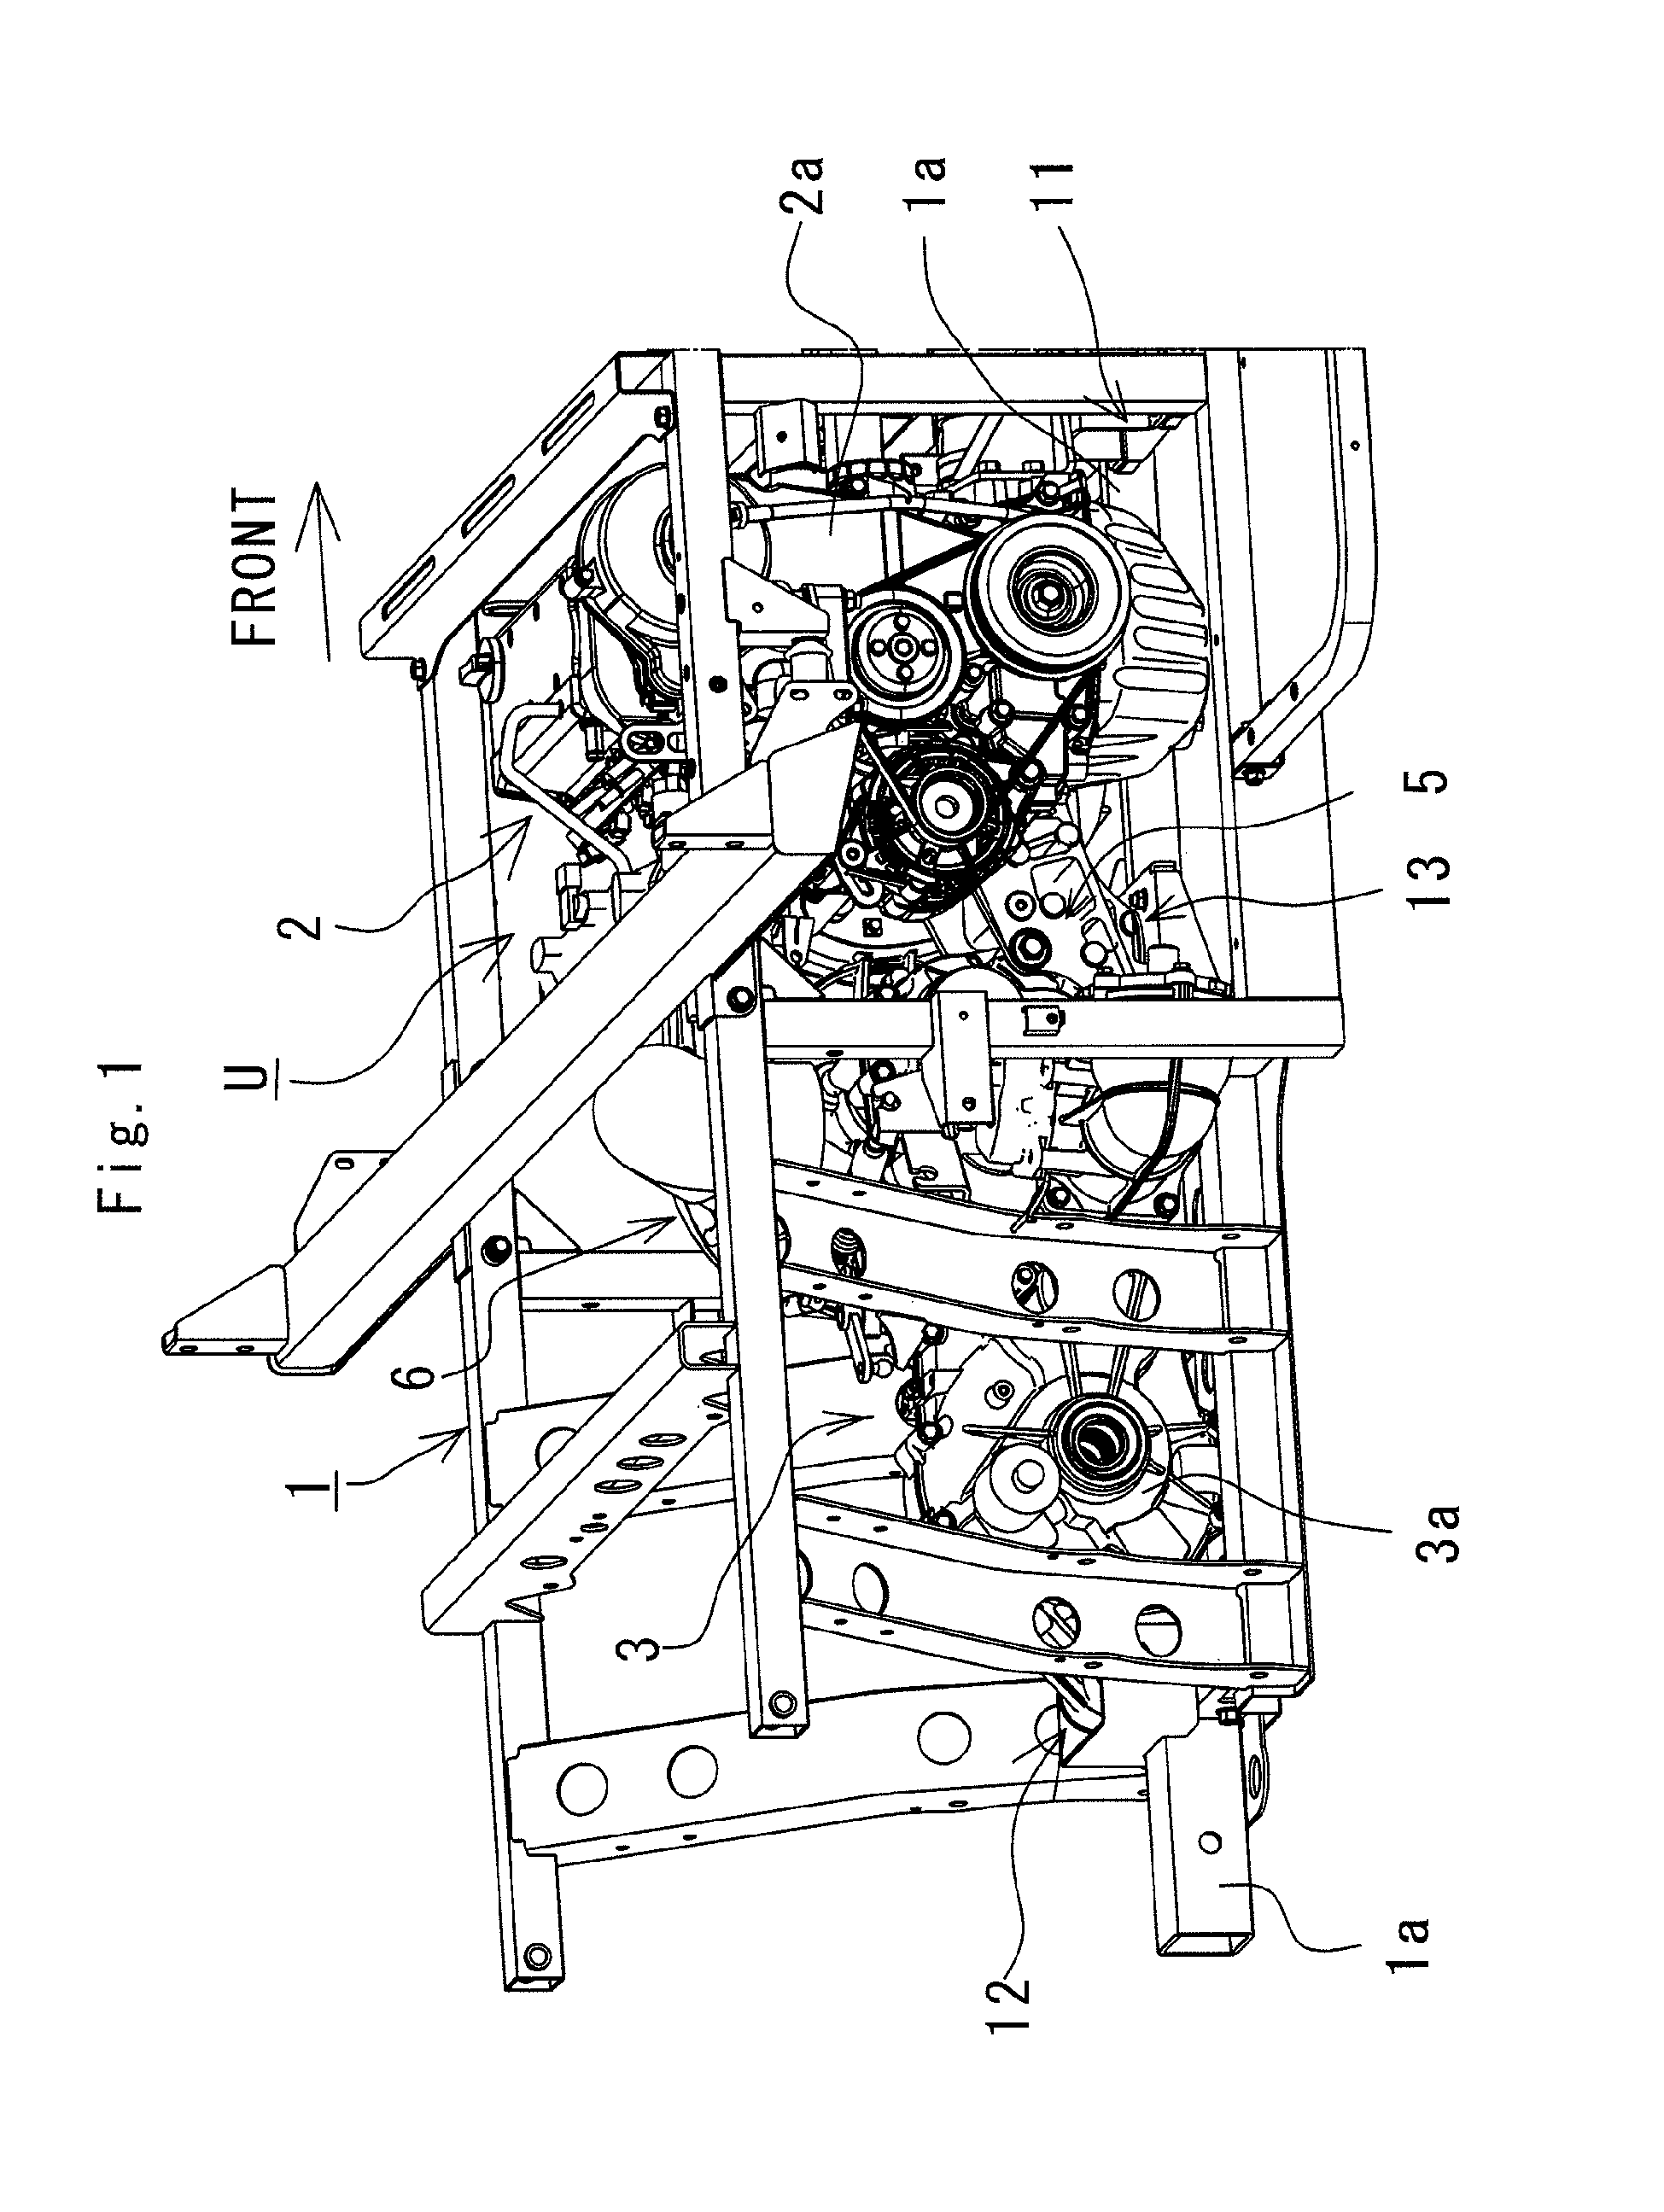 Mounting structure of a power unit for a utility vehicle